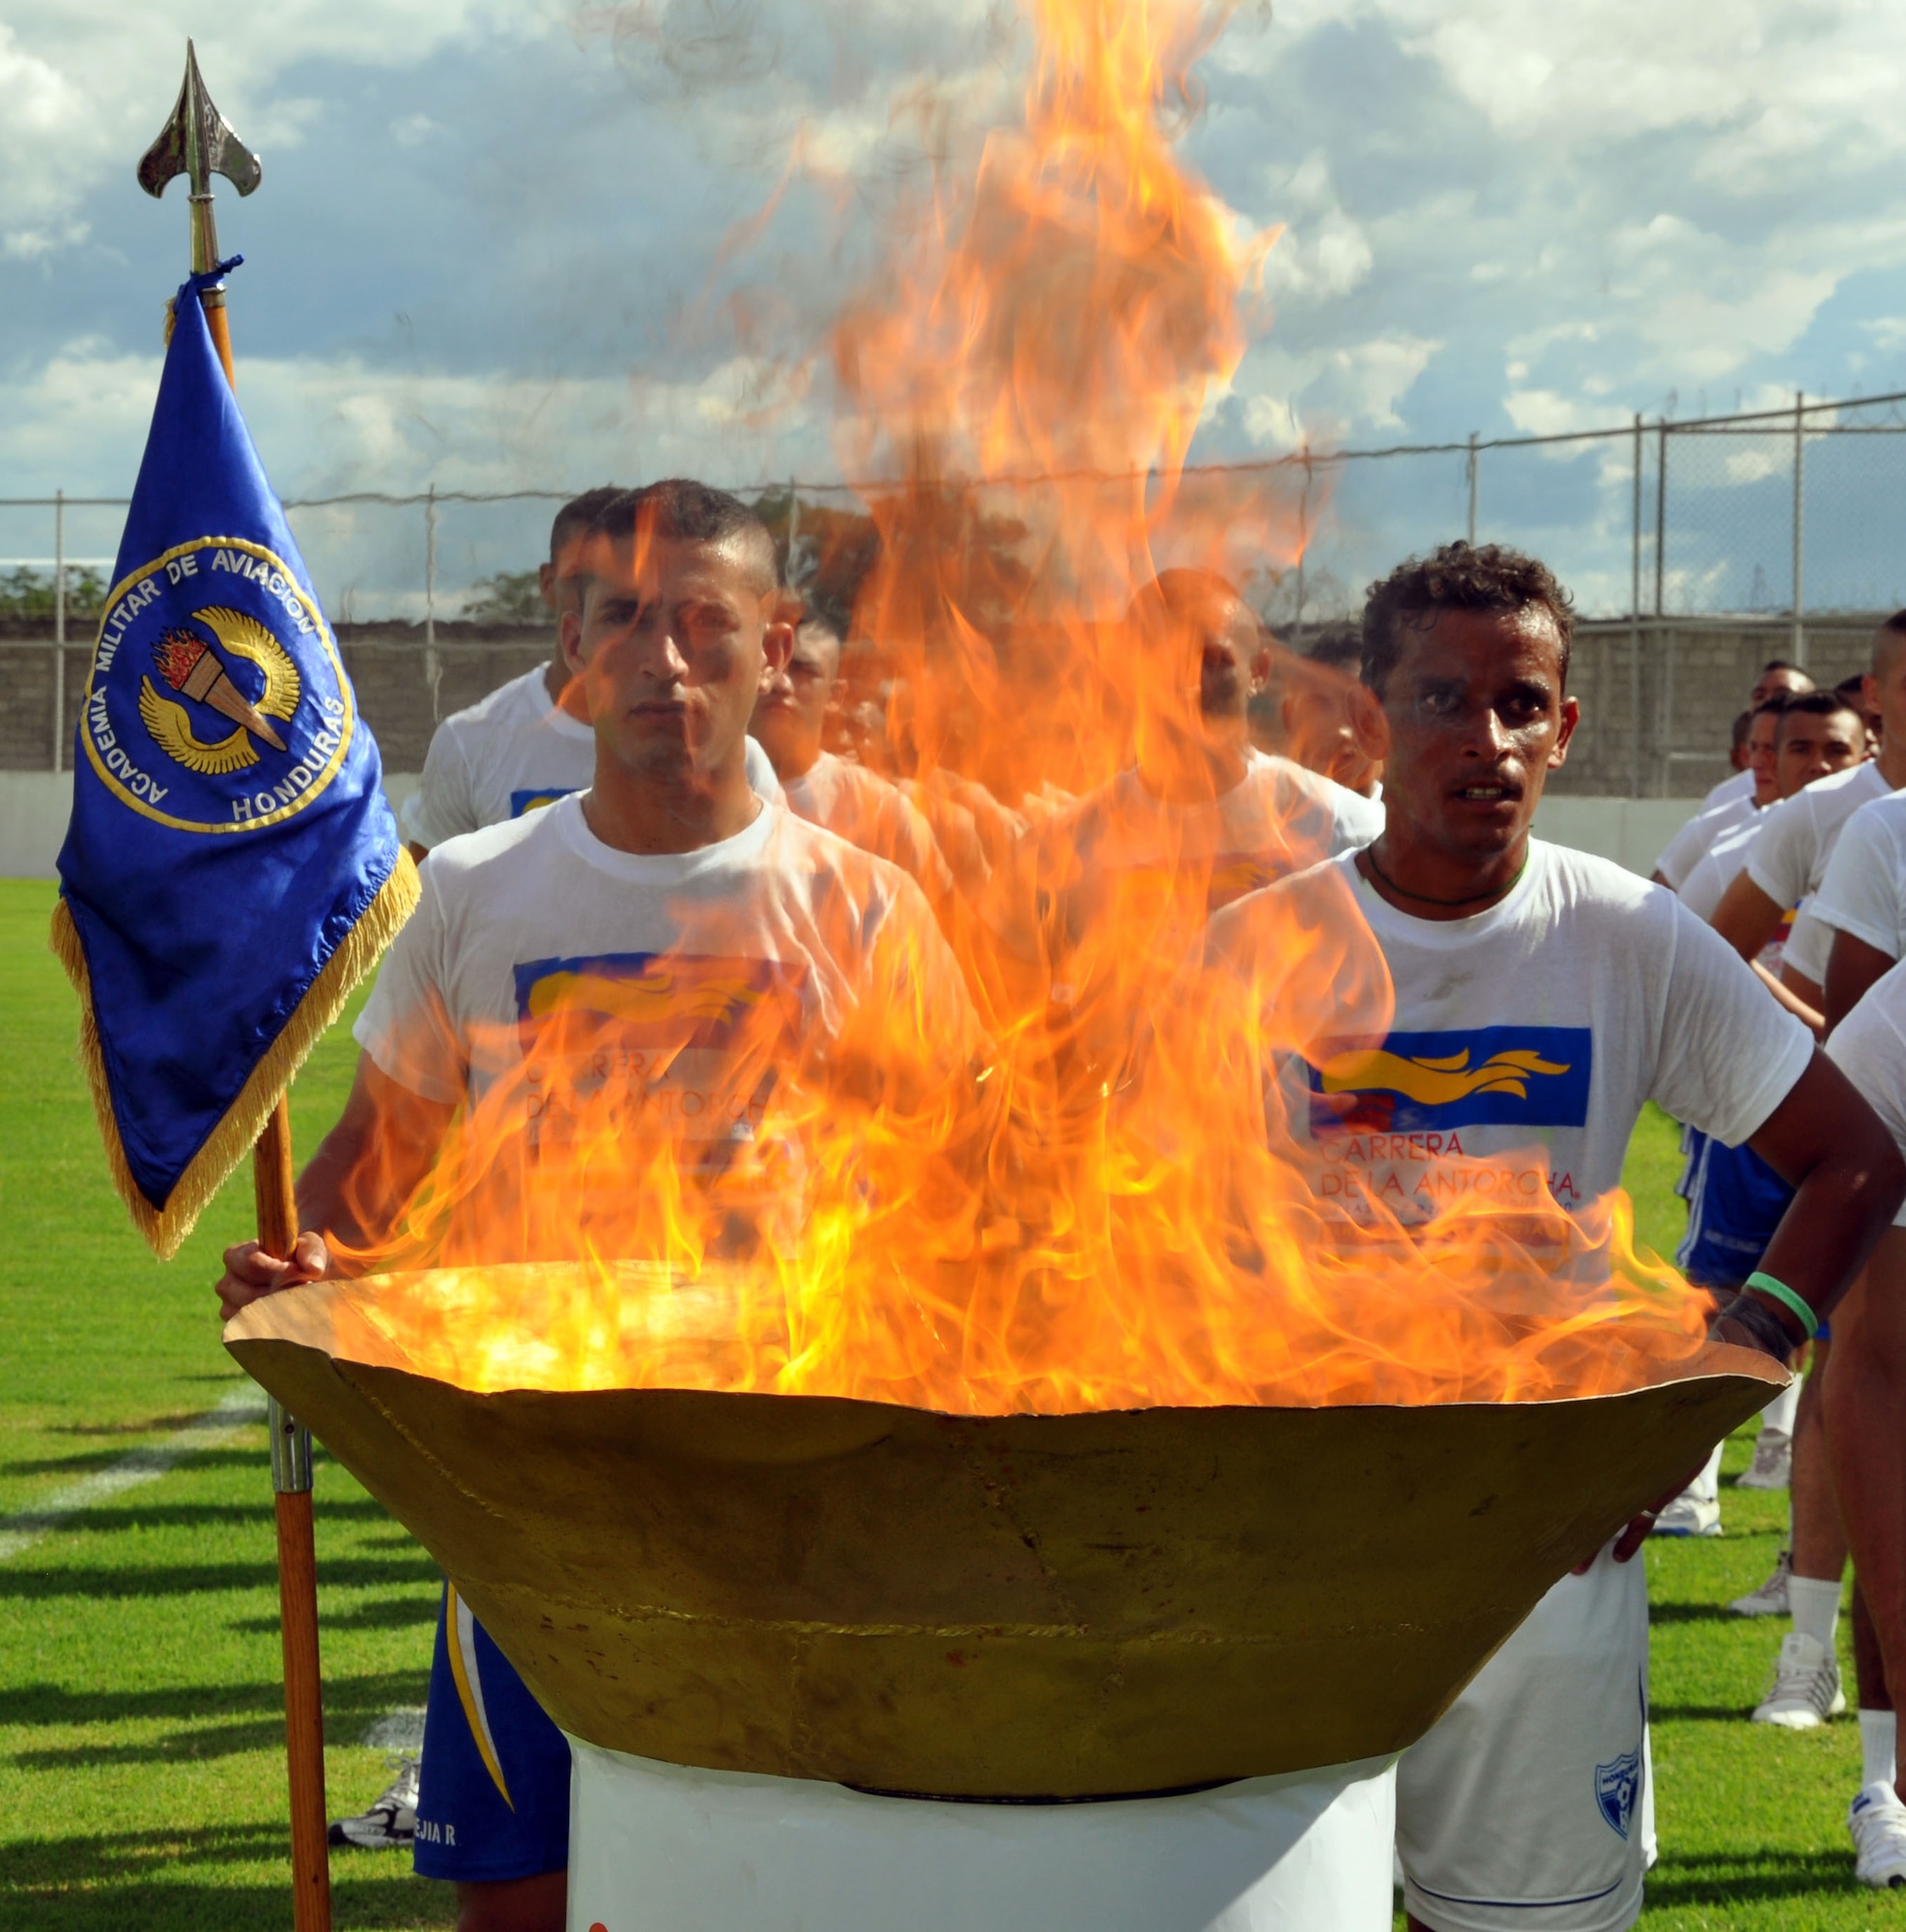 The Honduras Special Olympic flame was lit during the event's opening ceremony at Carlos Miranda Stadium, Comayagua, Honduras, Oct. 24, 2013.  Joint Task Force-Bravo is providing support for the Honduras Special Olympics soccer tournament, which will be played at Soto Cano Air Base.  (U.S. Air Force photo by Capt. Zach Anderson)